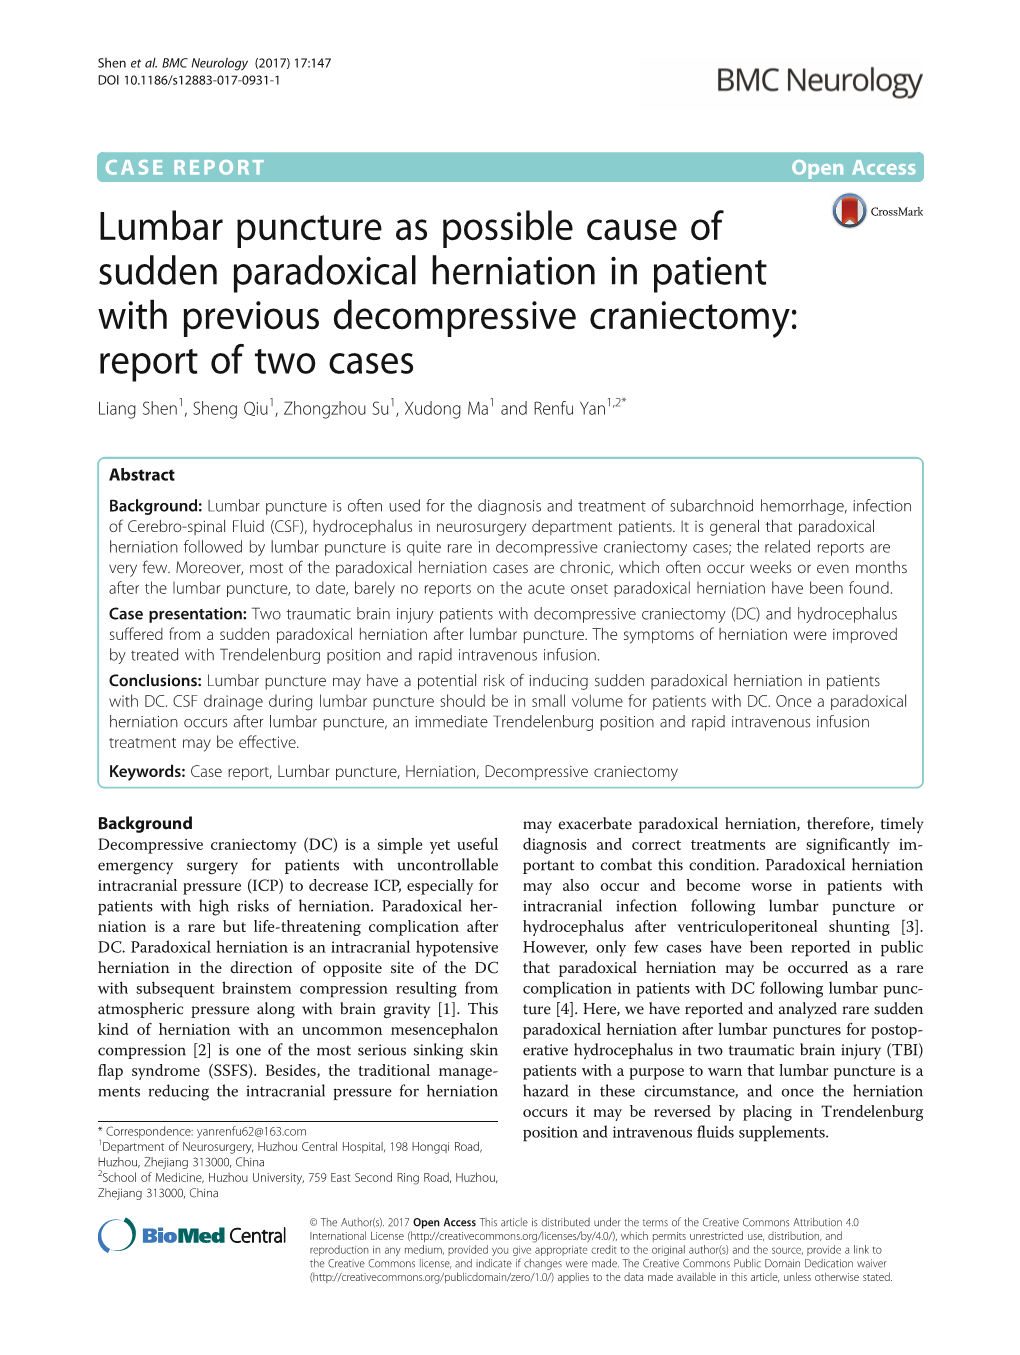 Lumbar Puncture As Possible Cause of Sudden Paradoxical Herniation In